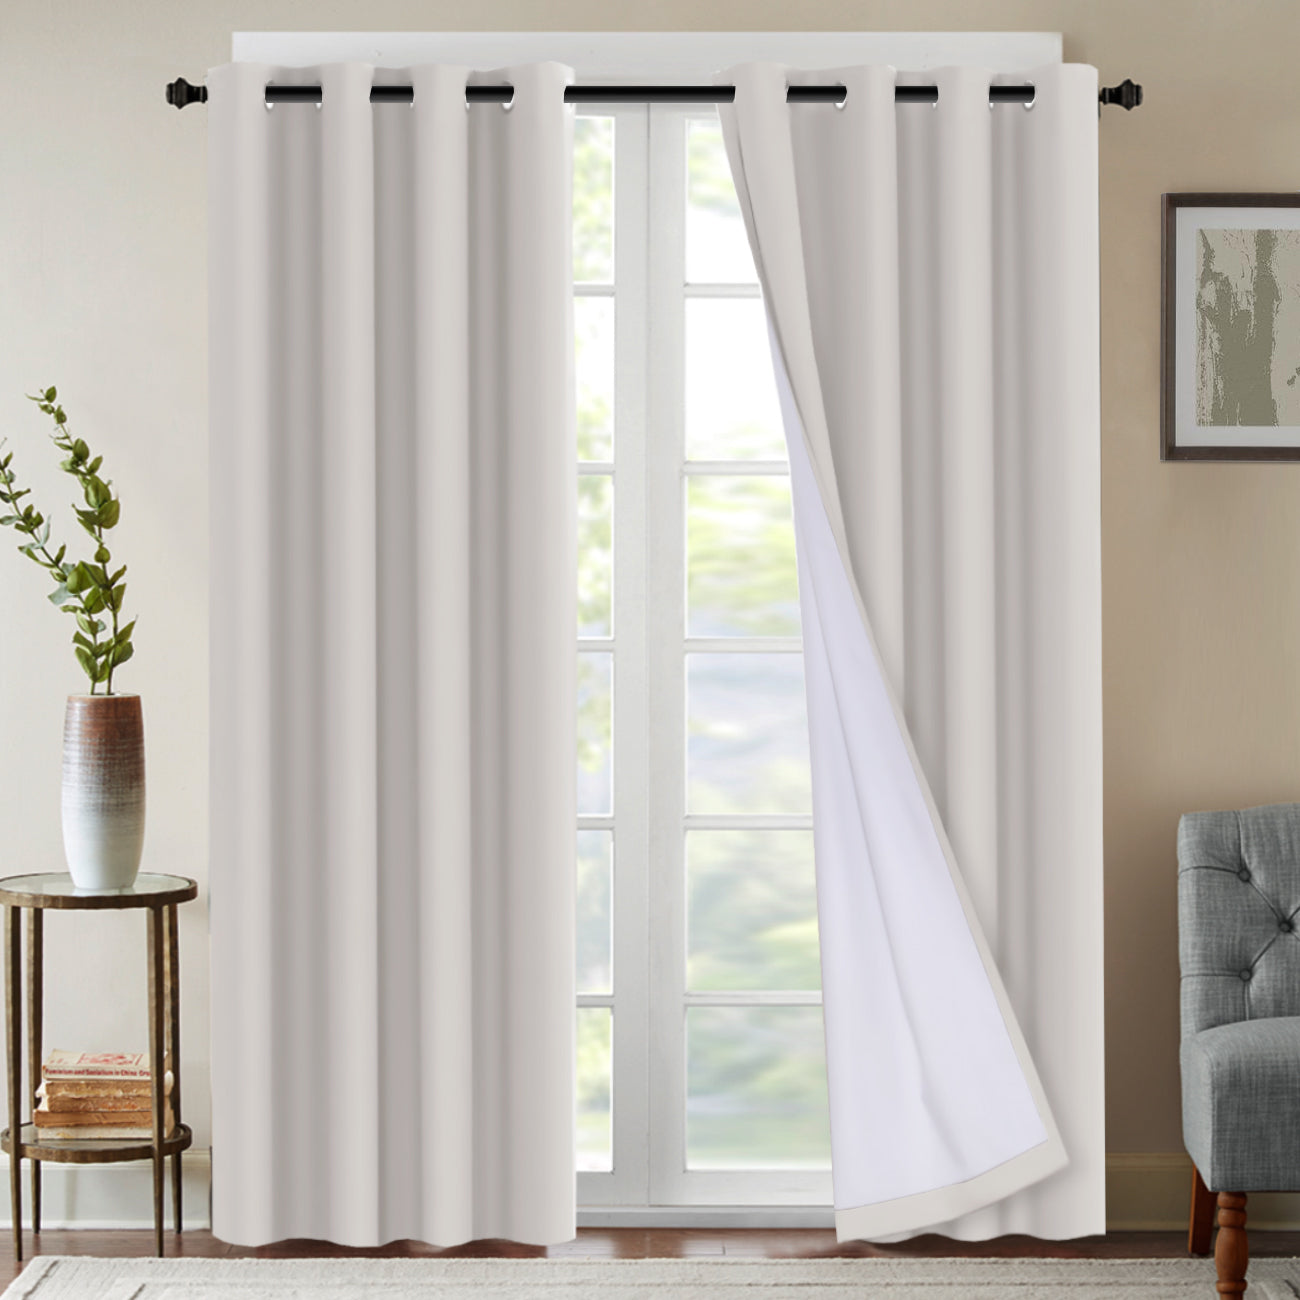 100% Blackout Curtains Full Light Blocking Curtain Draperies for Bedroom/Living Room 52'' x 108''